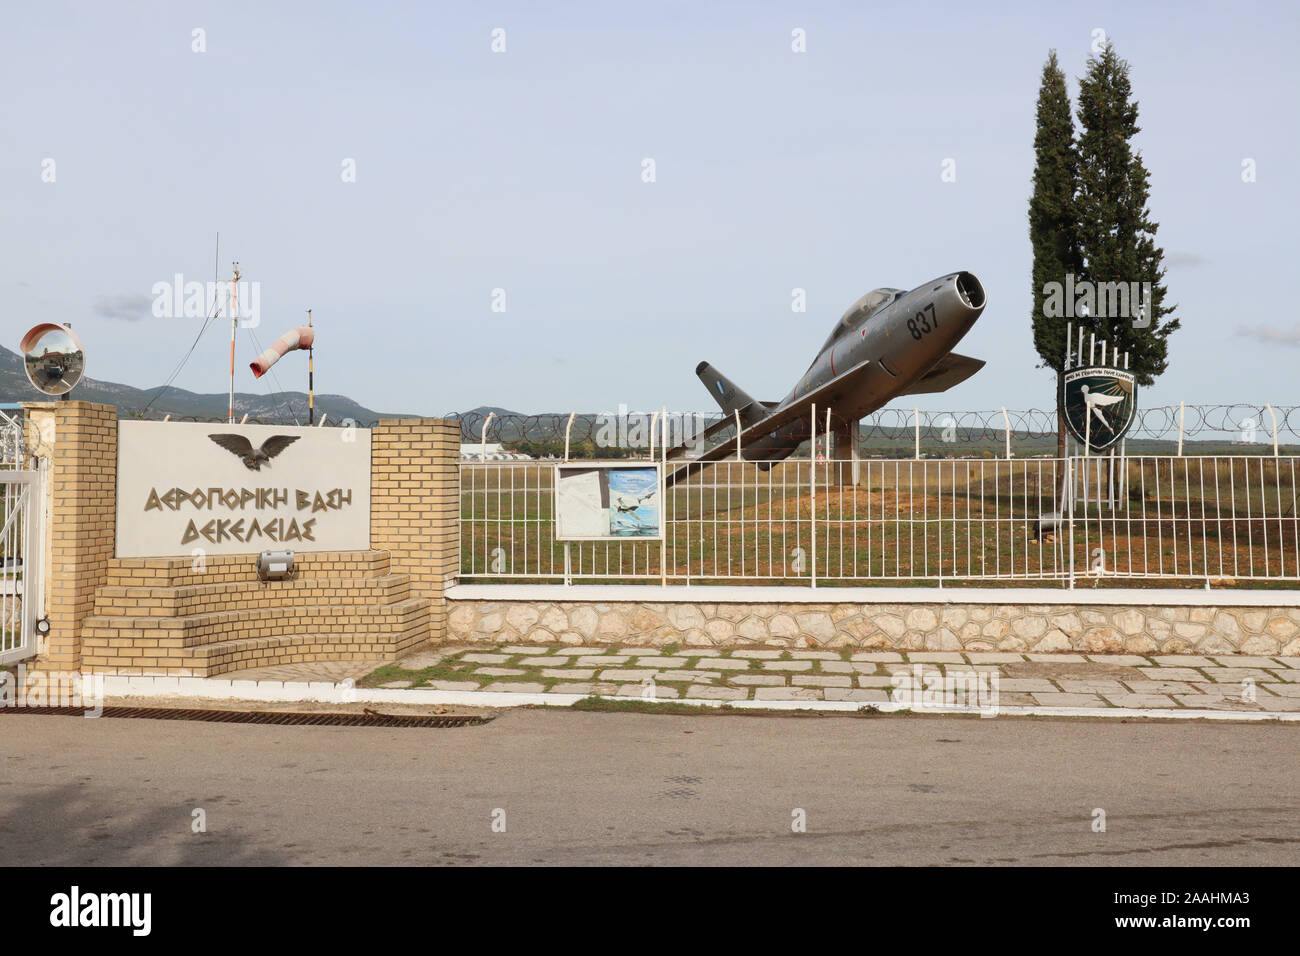 Hellenic Air Force Museum, General Views of Athens, Greece, 16 November  2019, Photo by Richard Goldschmidt Stock Photo - Alamy